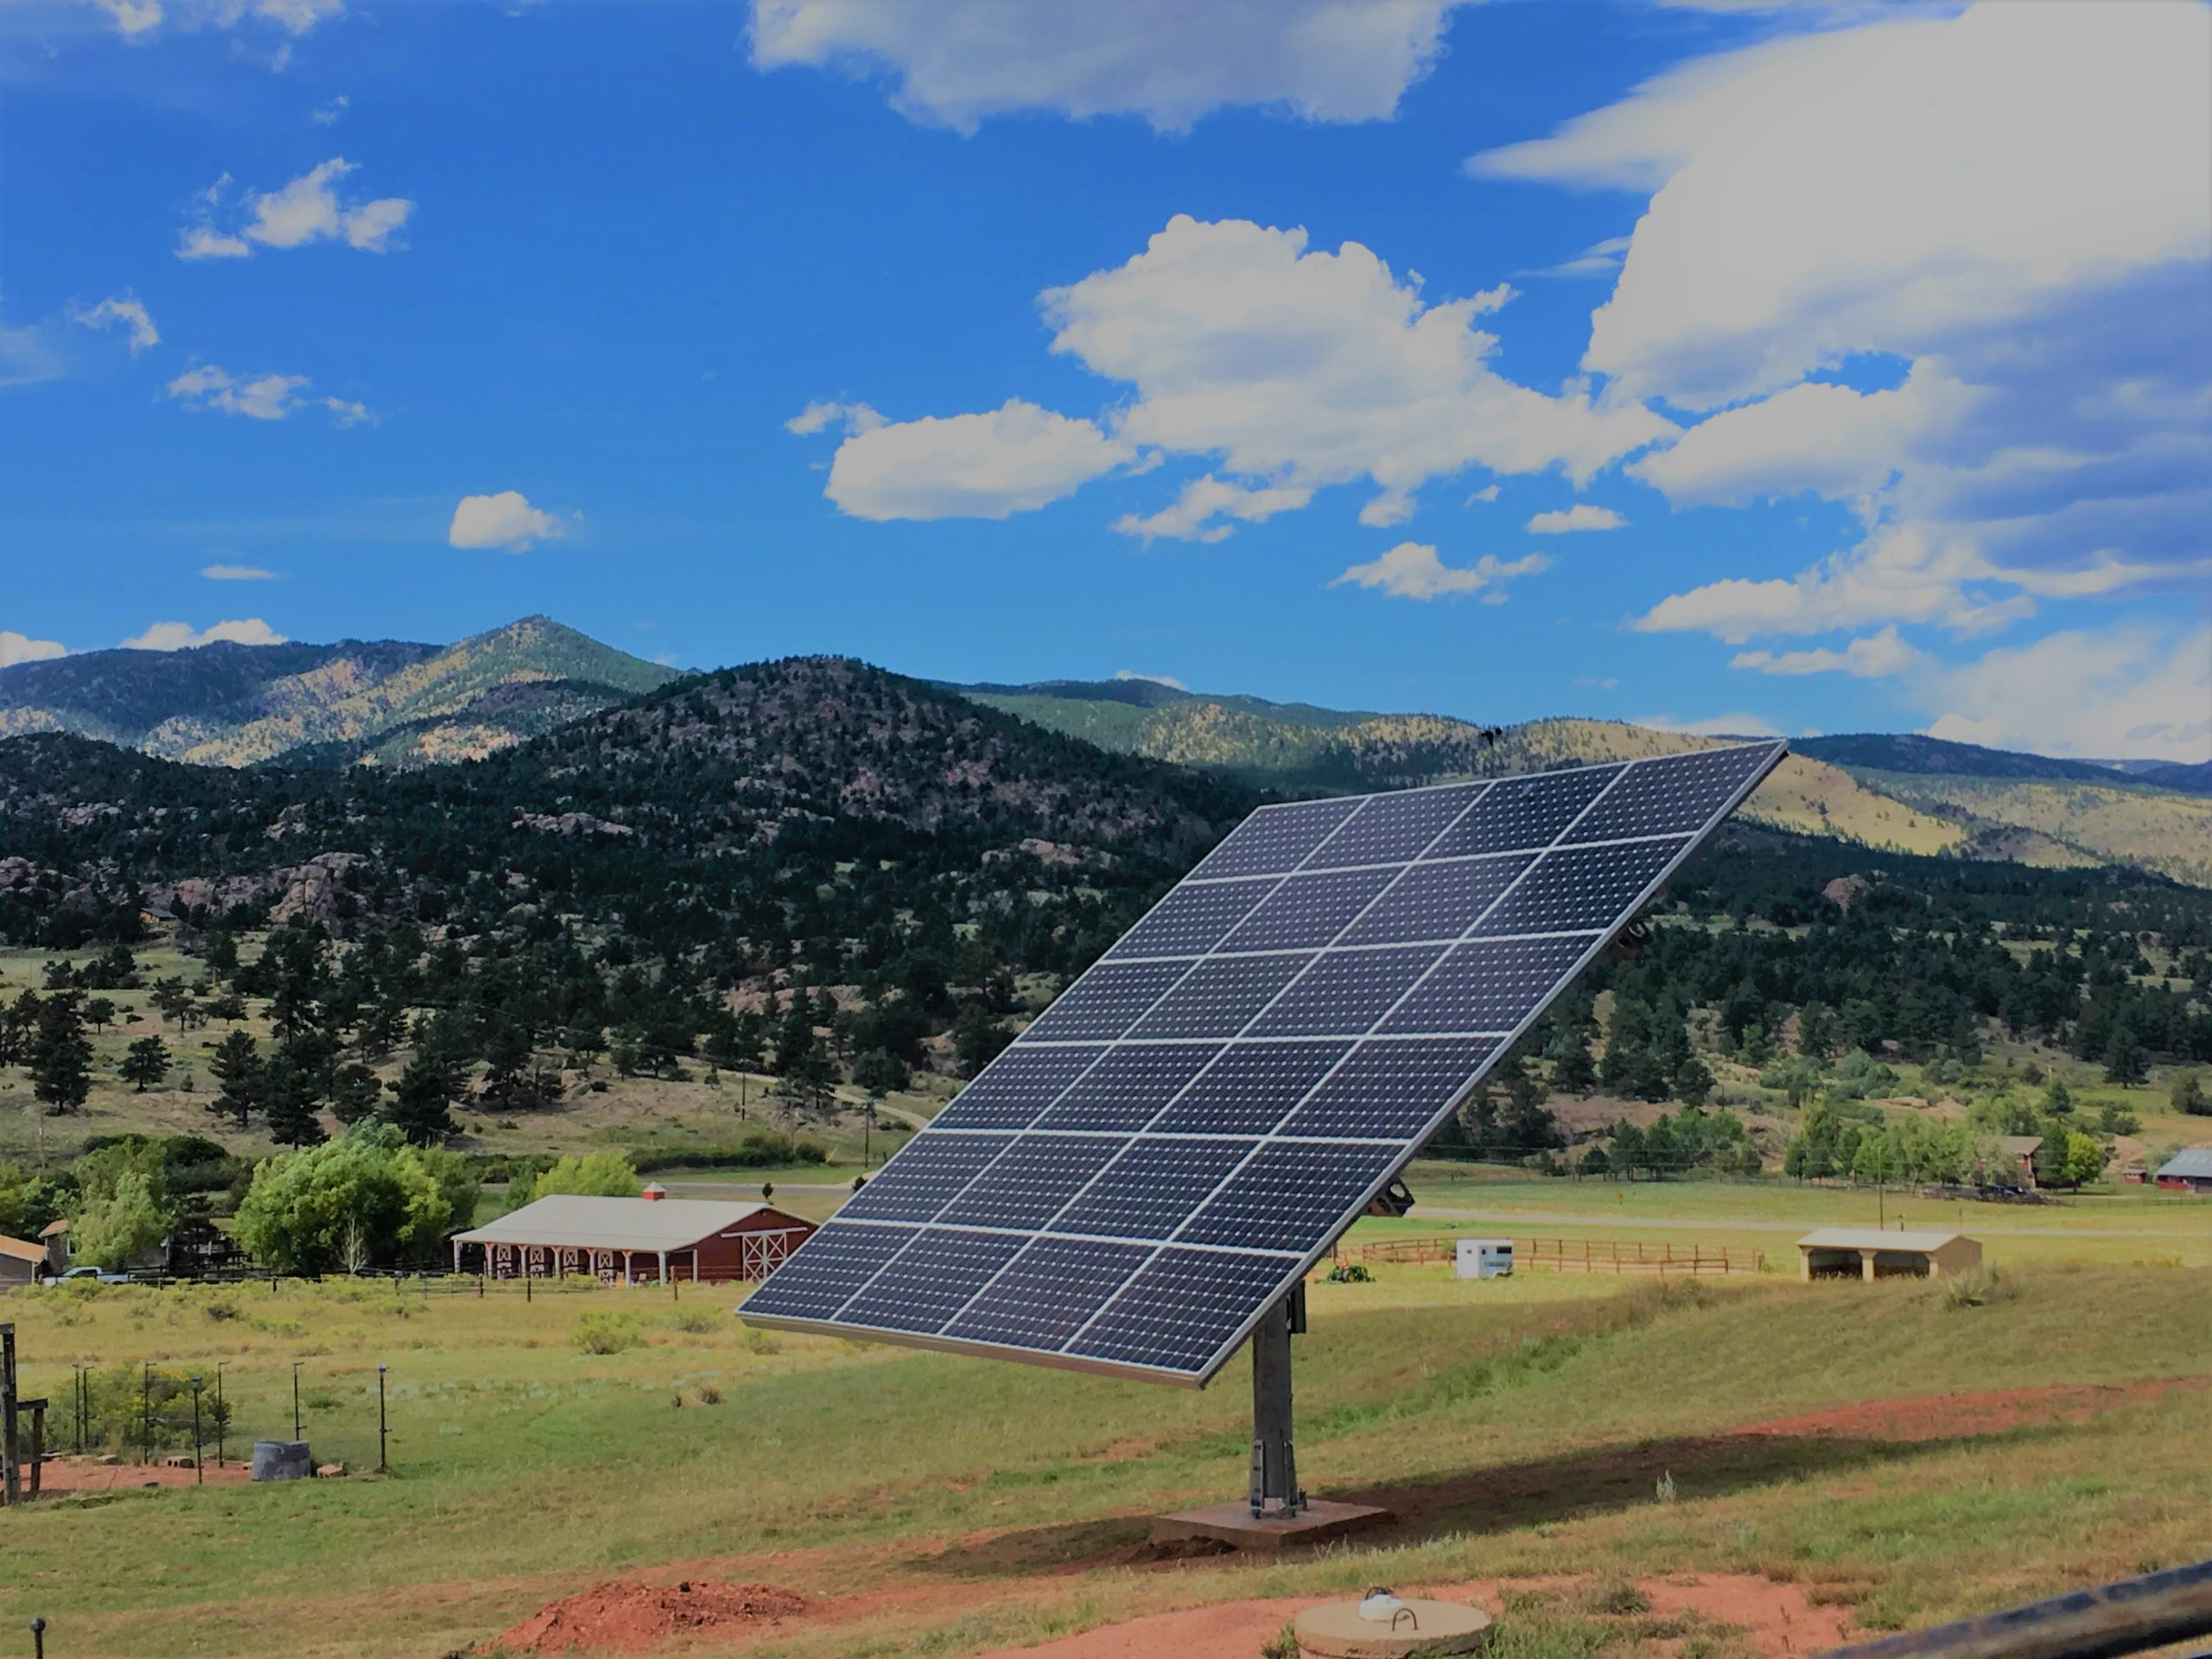 Single outdoor solar tracker installed in remote setting